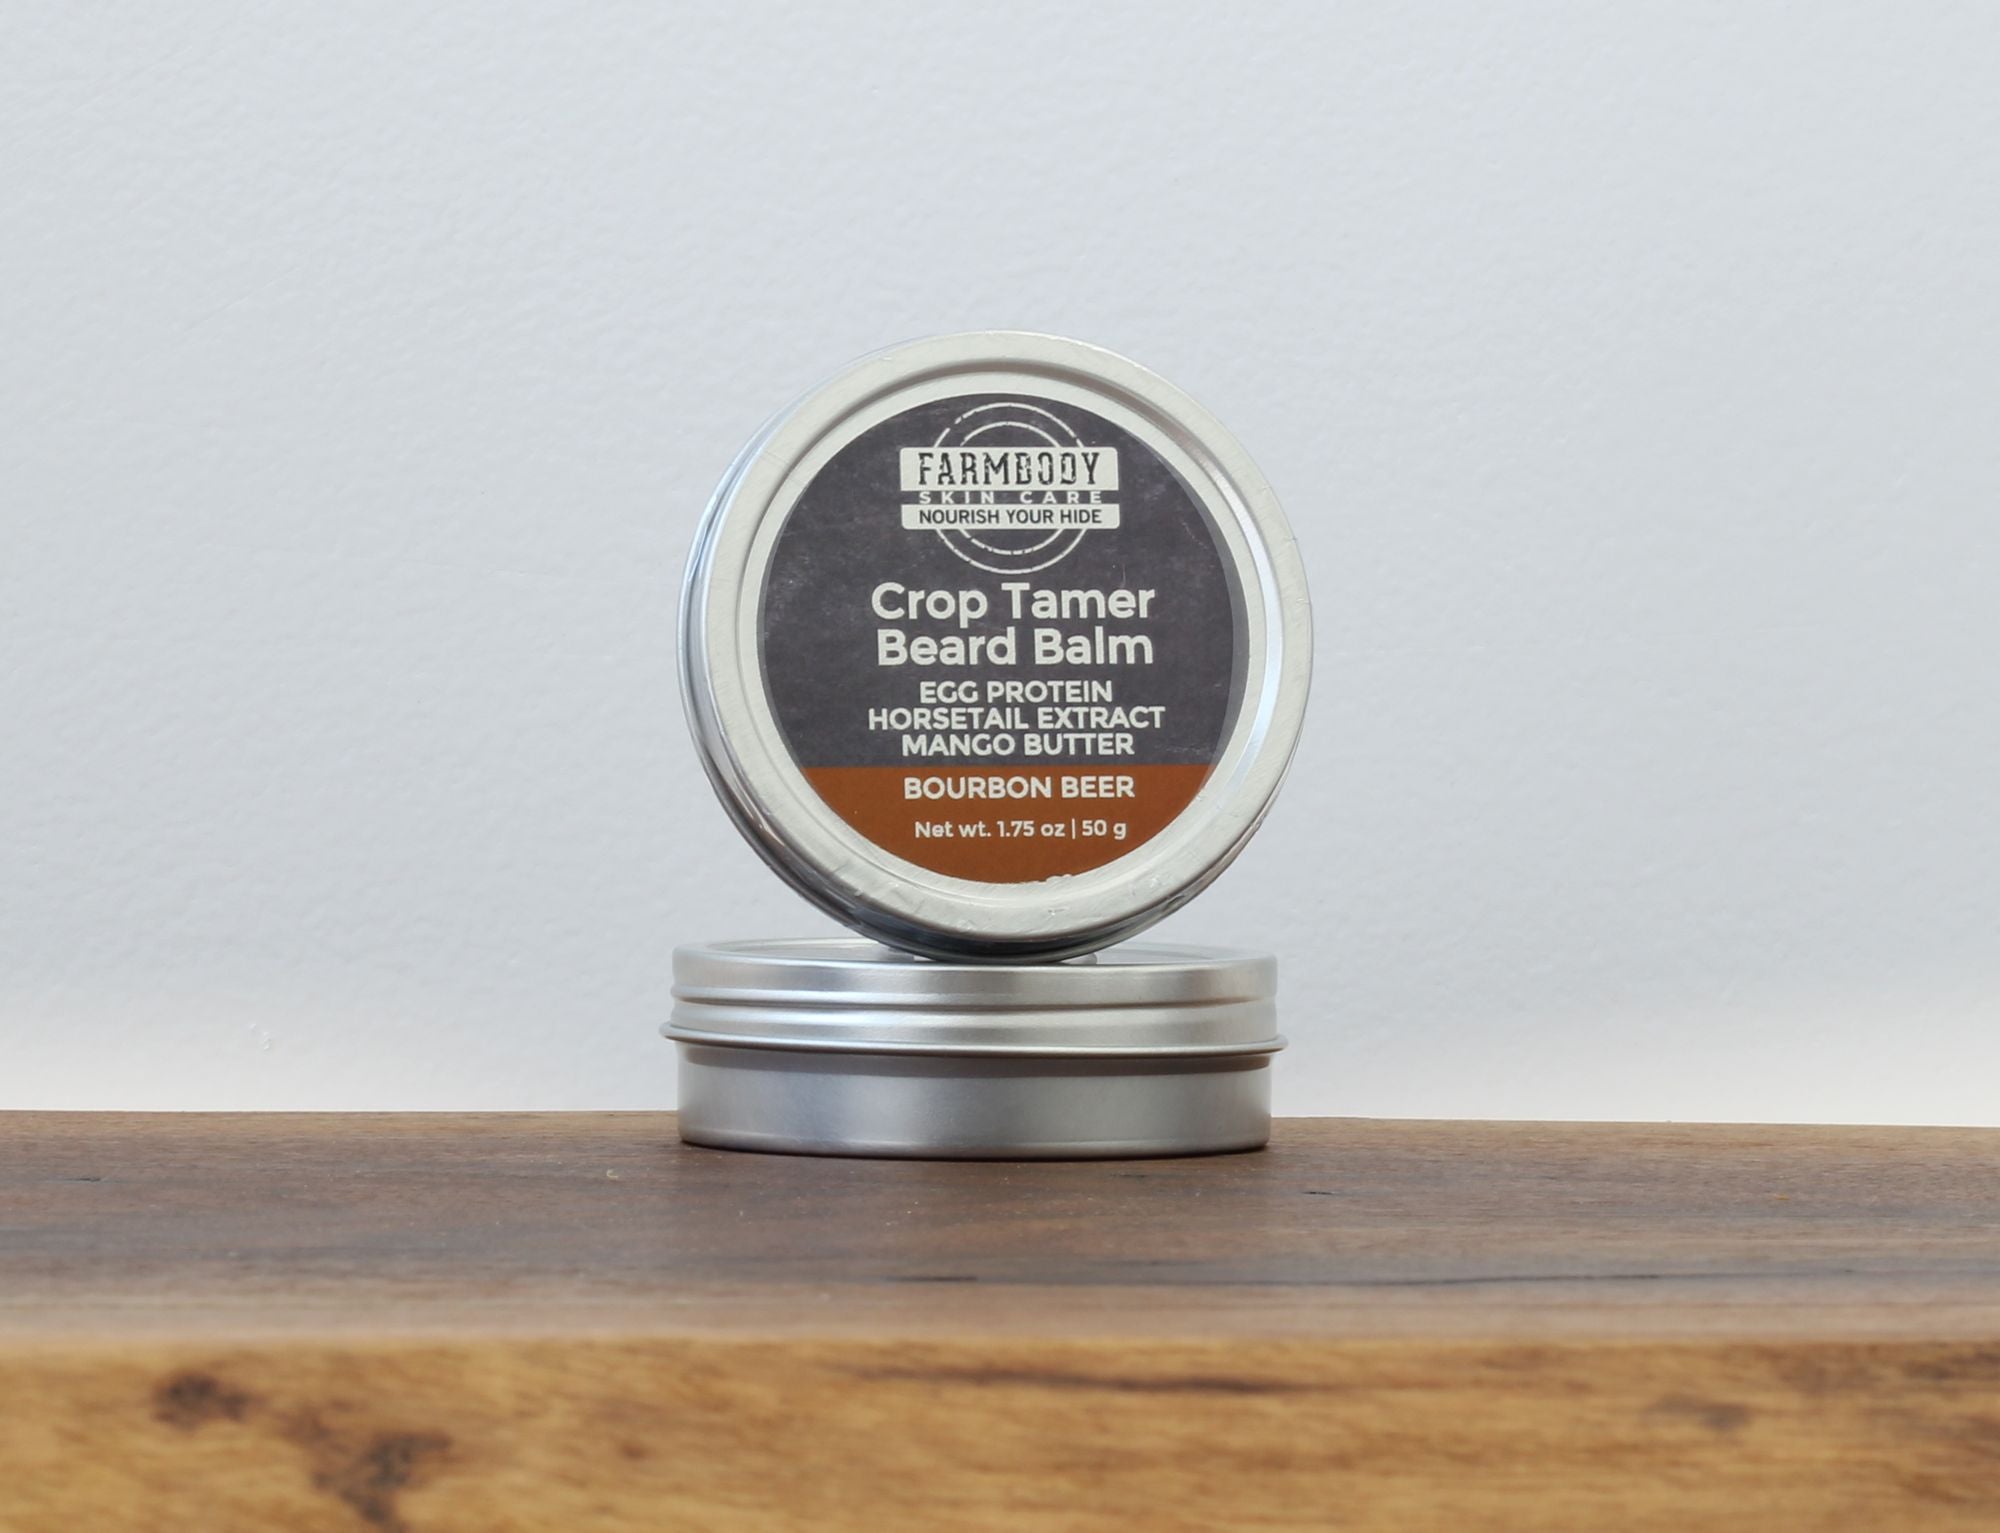 Crop tamer beard balm with egg protein horsetail extract and mango butter for the best way to condition your beard